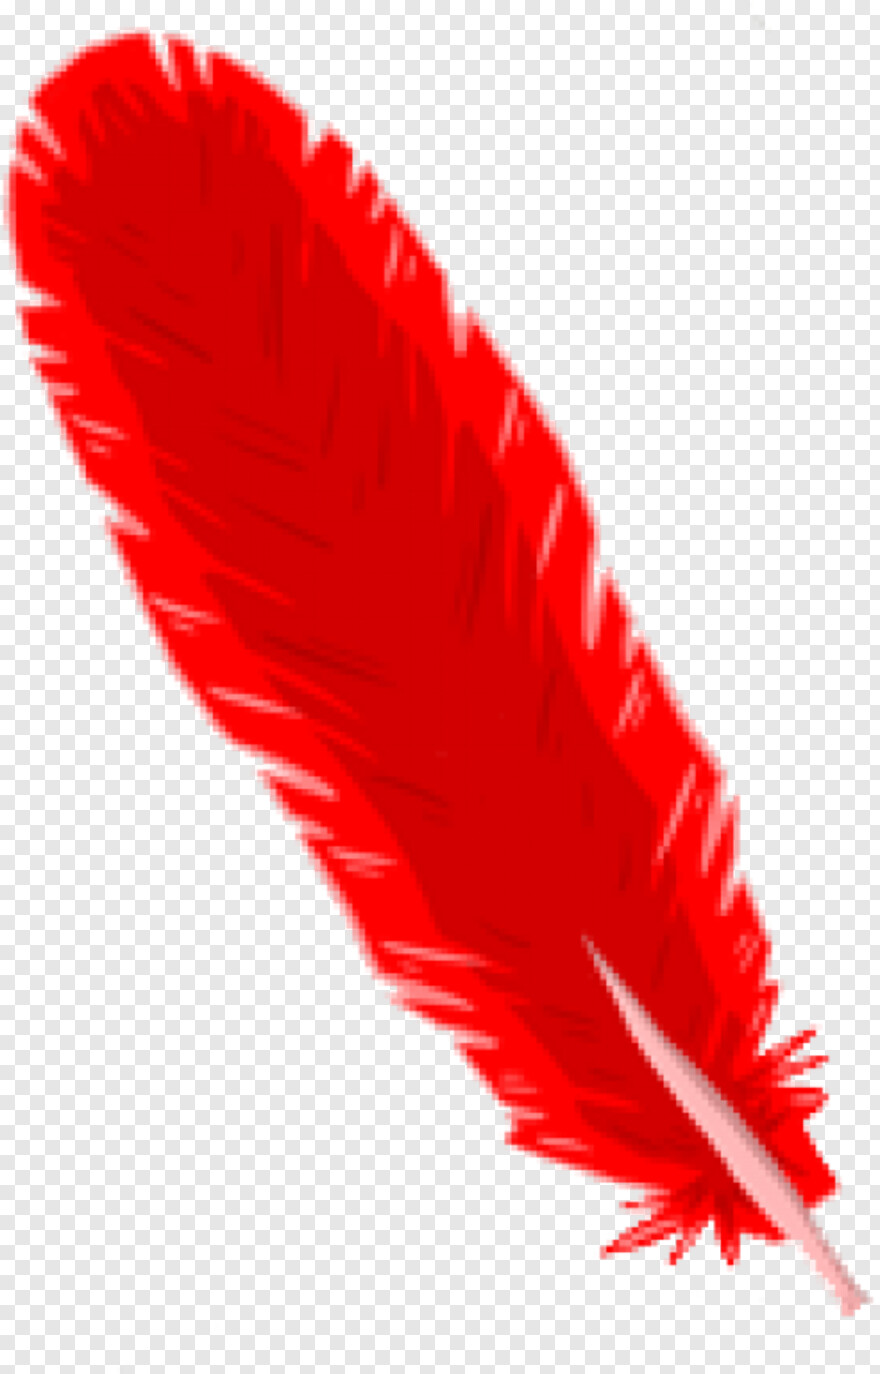 feather # 842466